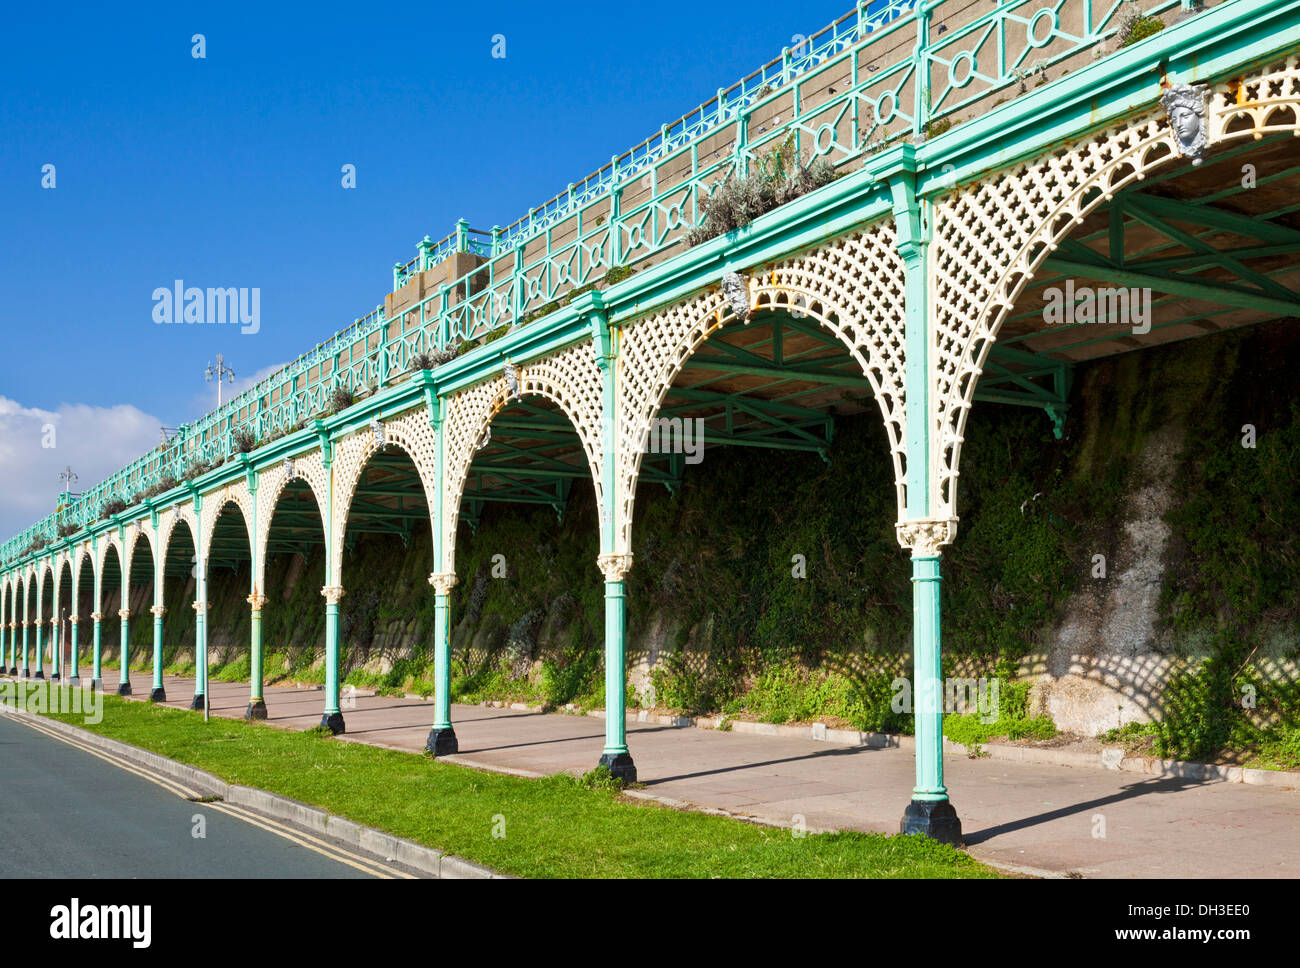 Ornate iron lacework of the arches on Madeira drive Brighton East Sussex England GB UK EU Europe Stock Photo